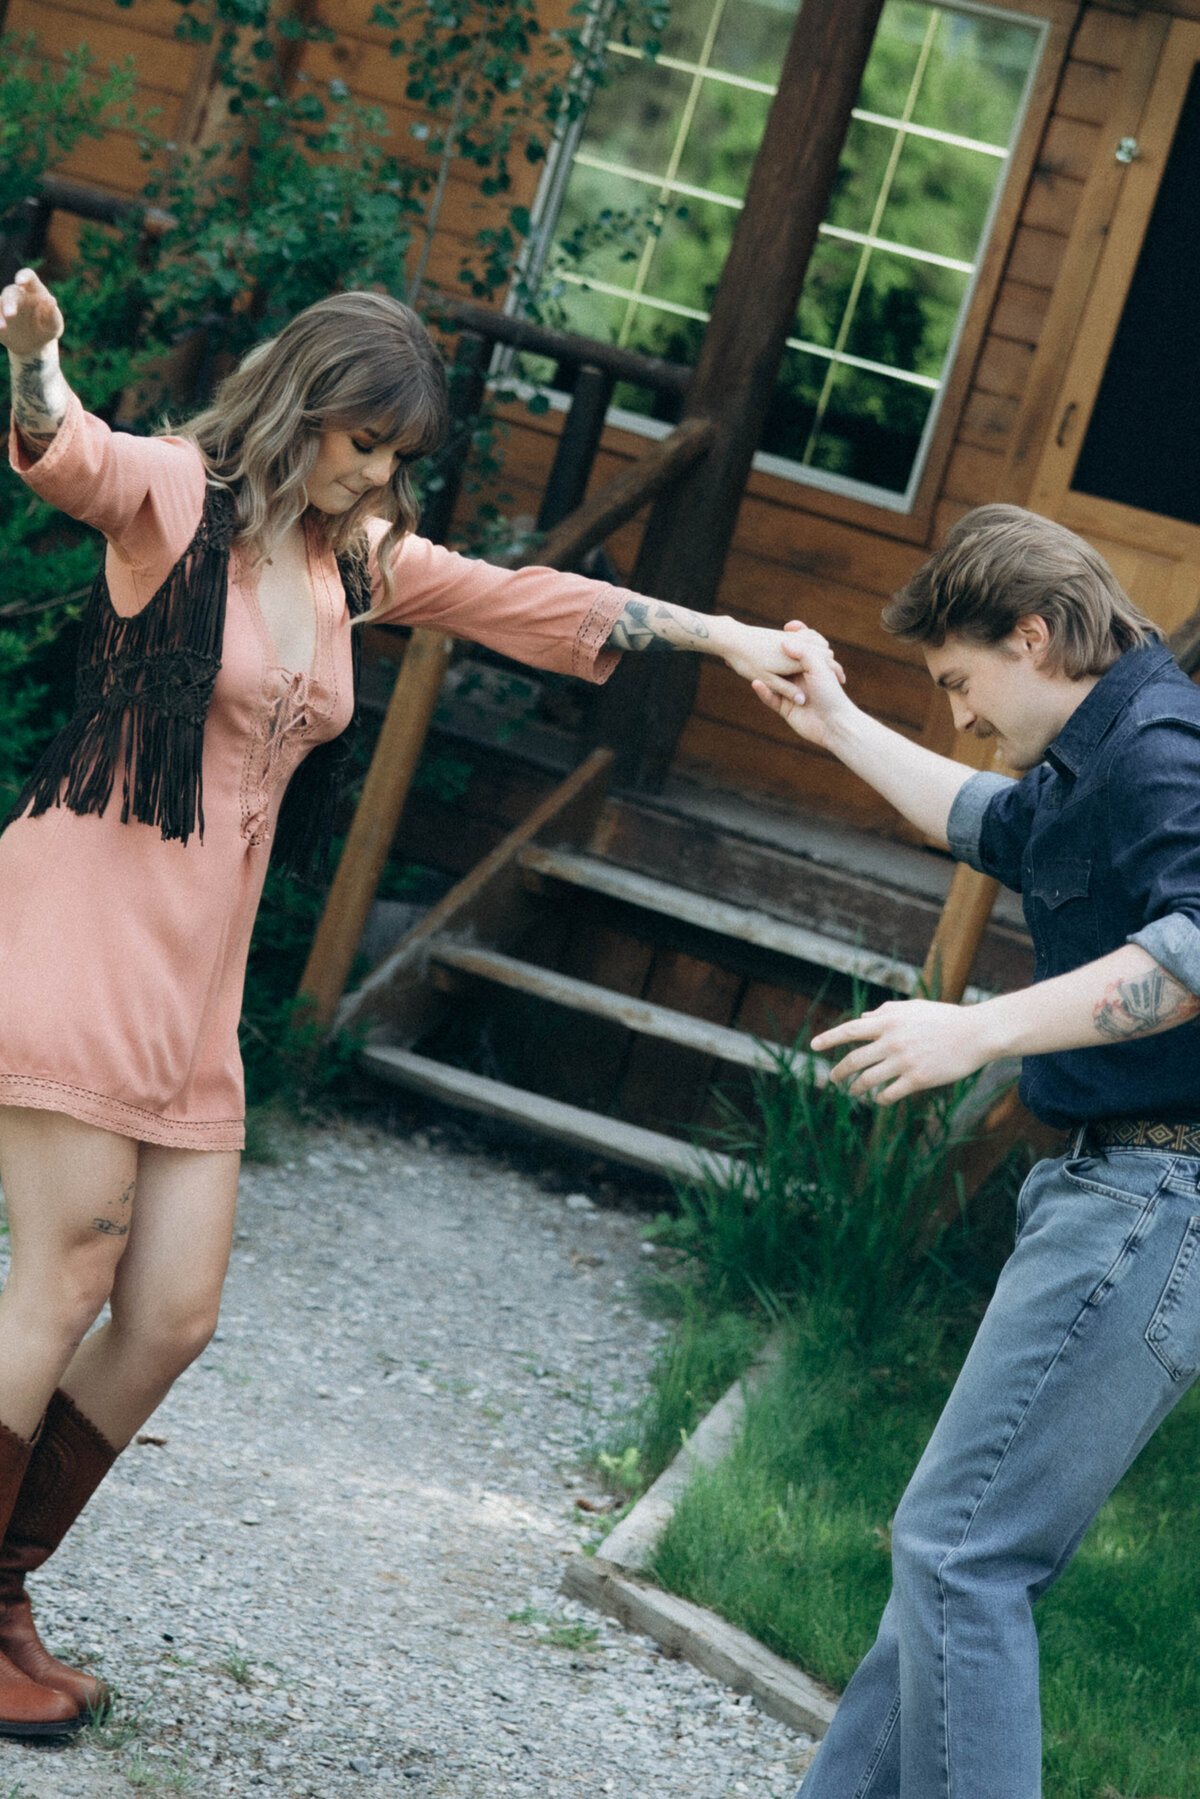 vpc-couples-vintage-cabin-shoot-17